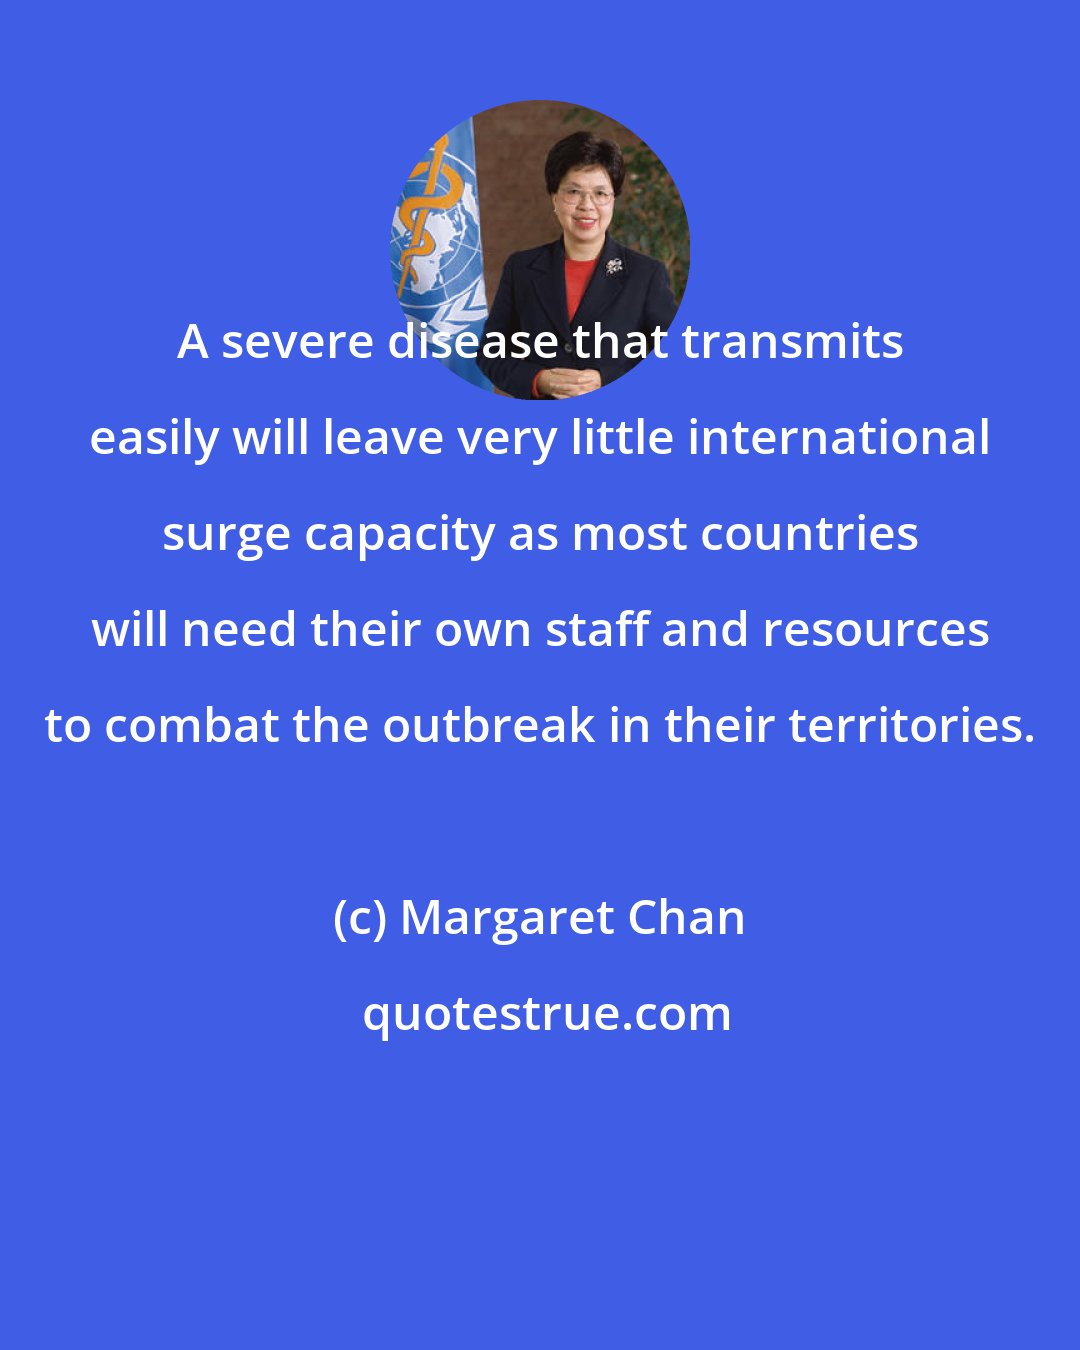 Margaret Chan: A severe disease that transmits easily will leave very little international surge capacity as most countries will need their own staff and resources to combat the outbreak in their territories.